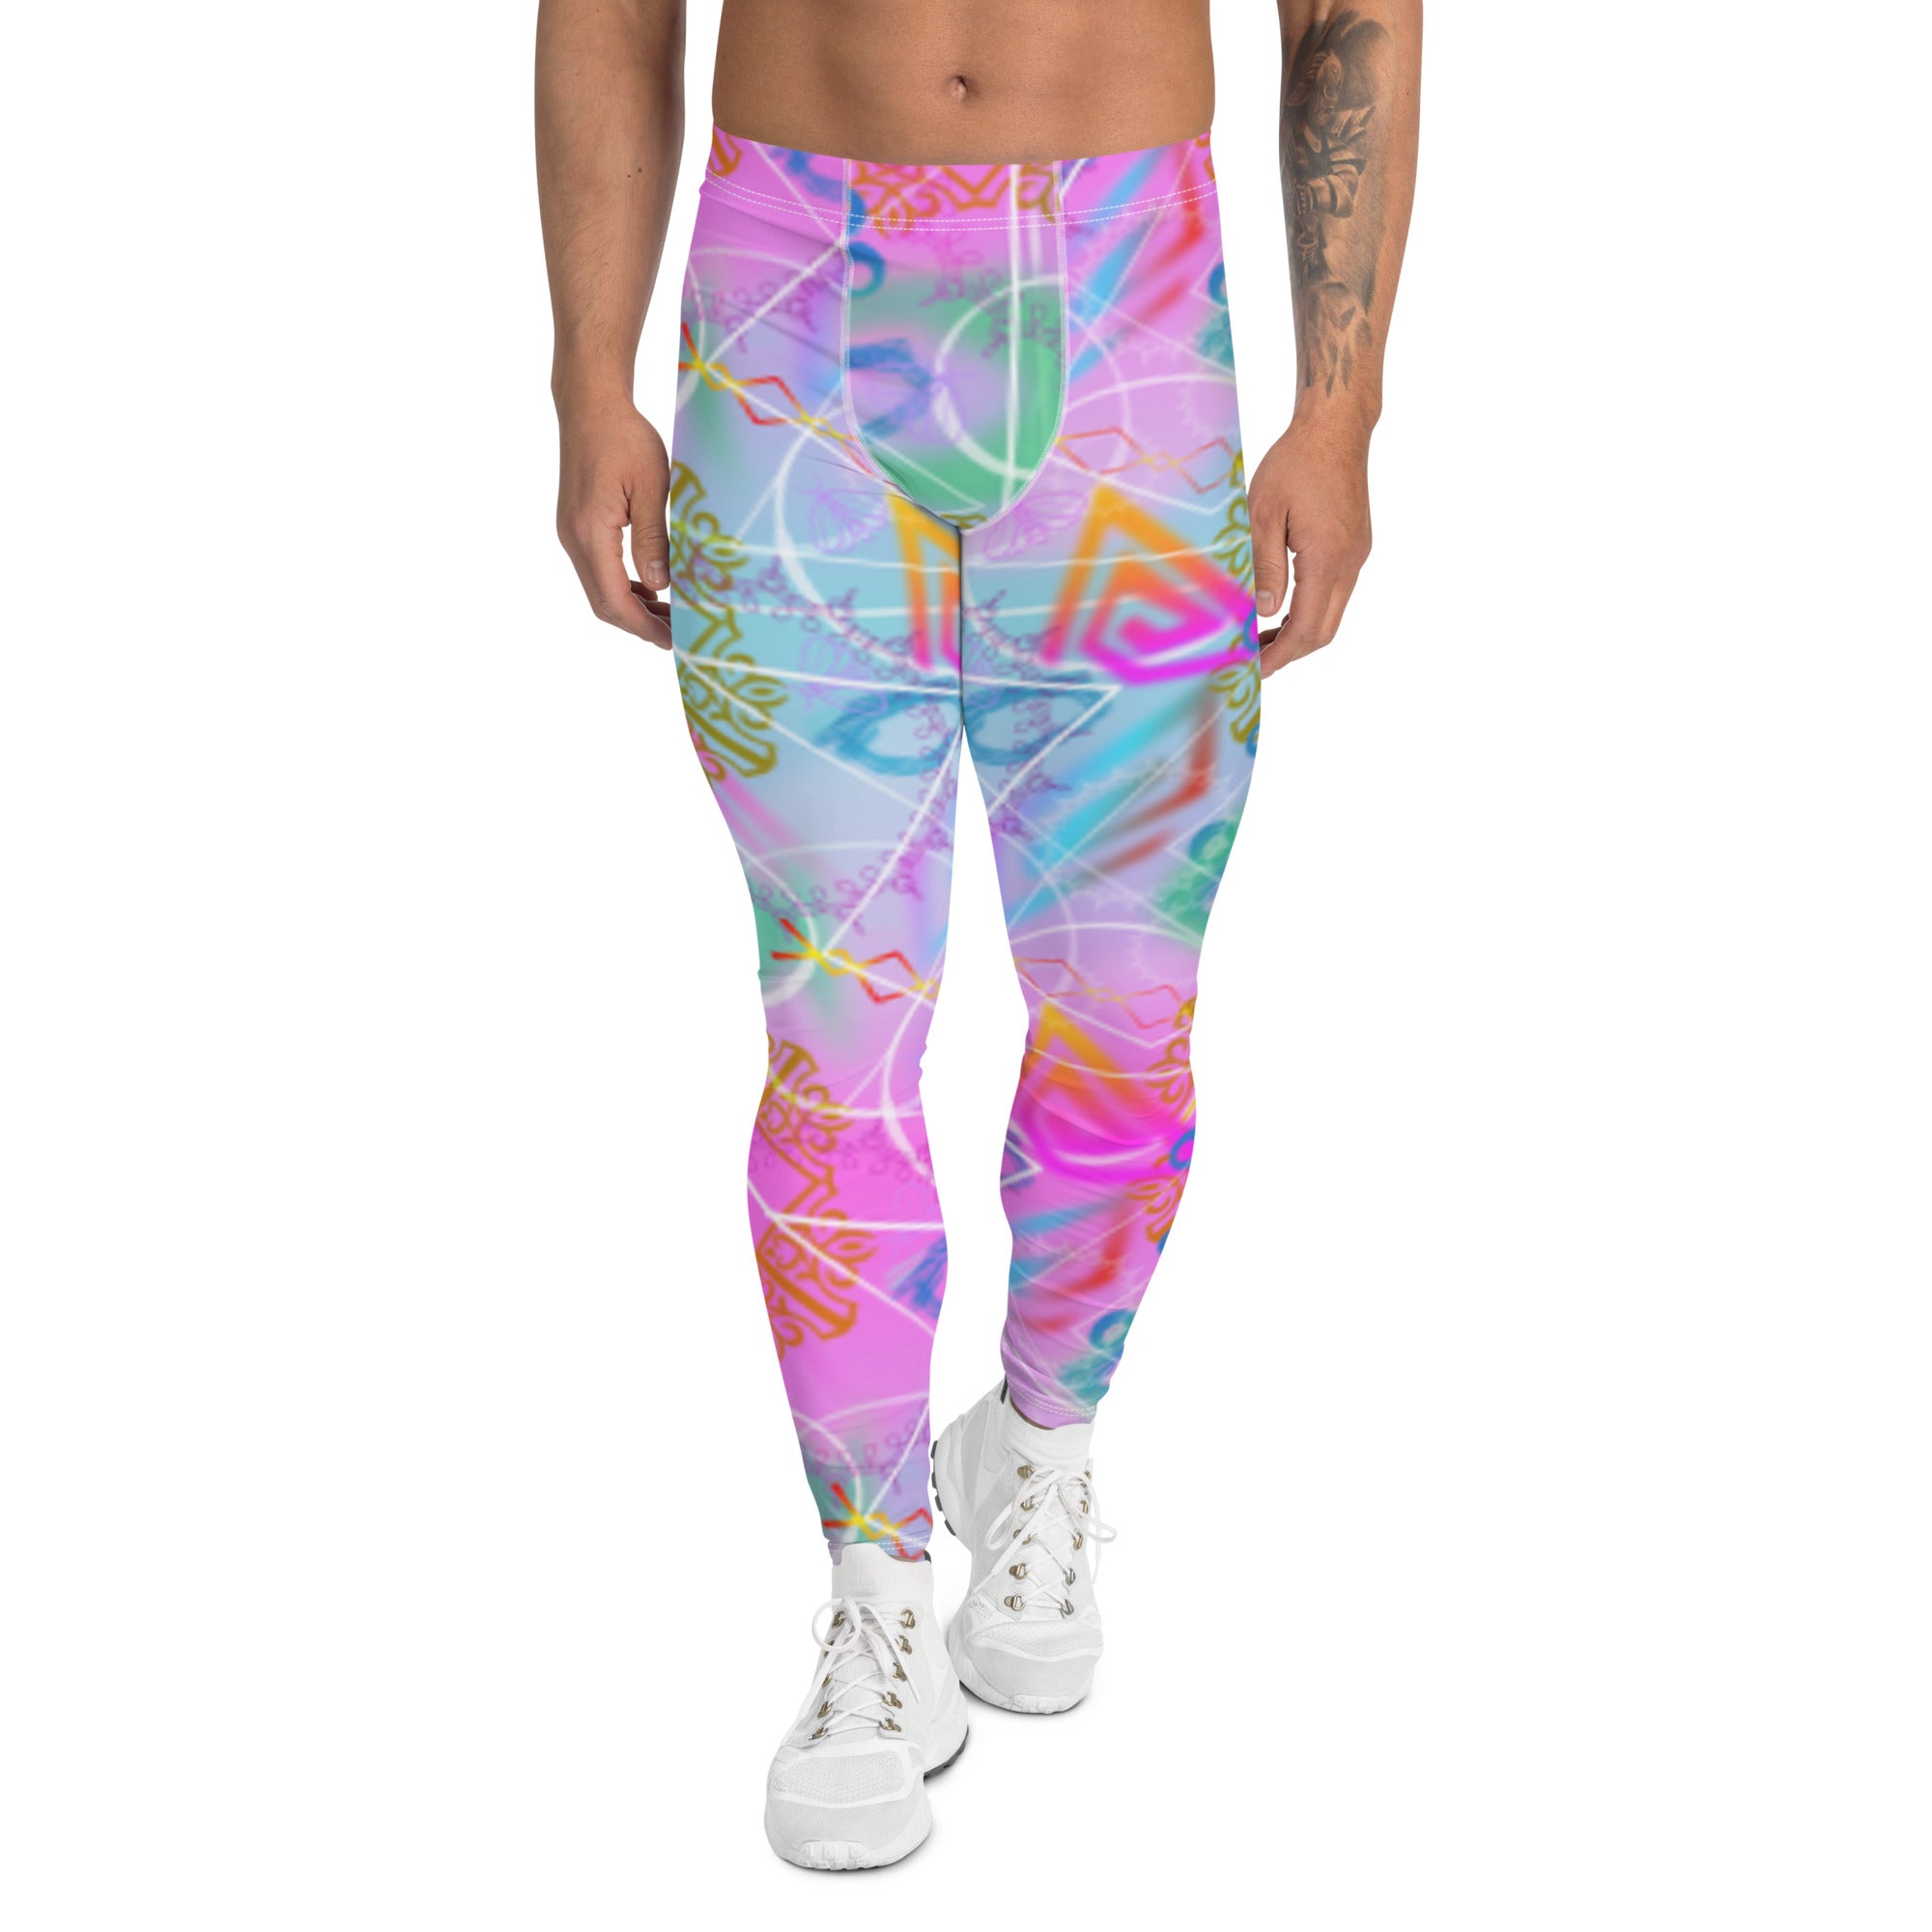 Vaporwave Mandala mens leggings in pink and blue with geometric shapes and patterns on these synthwave and retrowave style meggings or compression pants for men by BillingtonPix